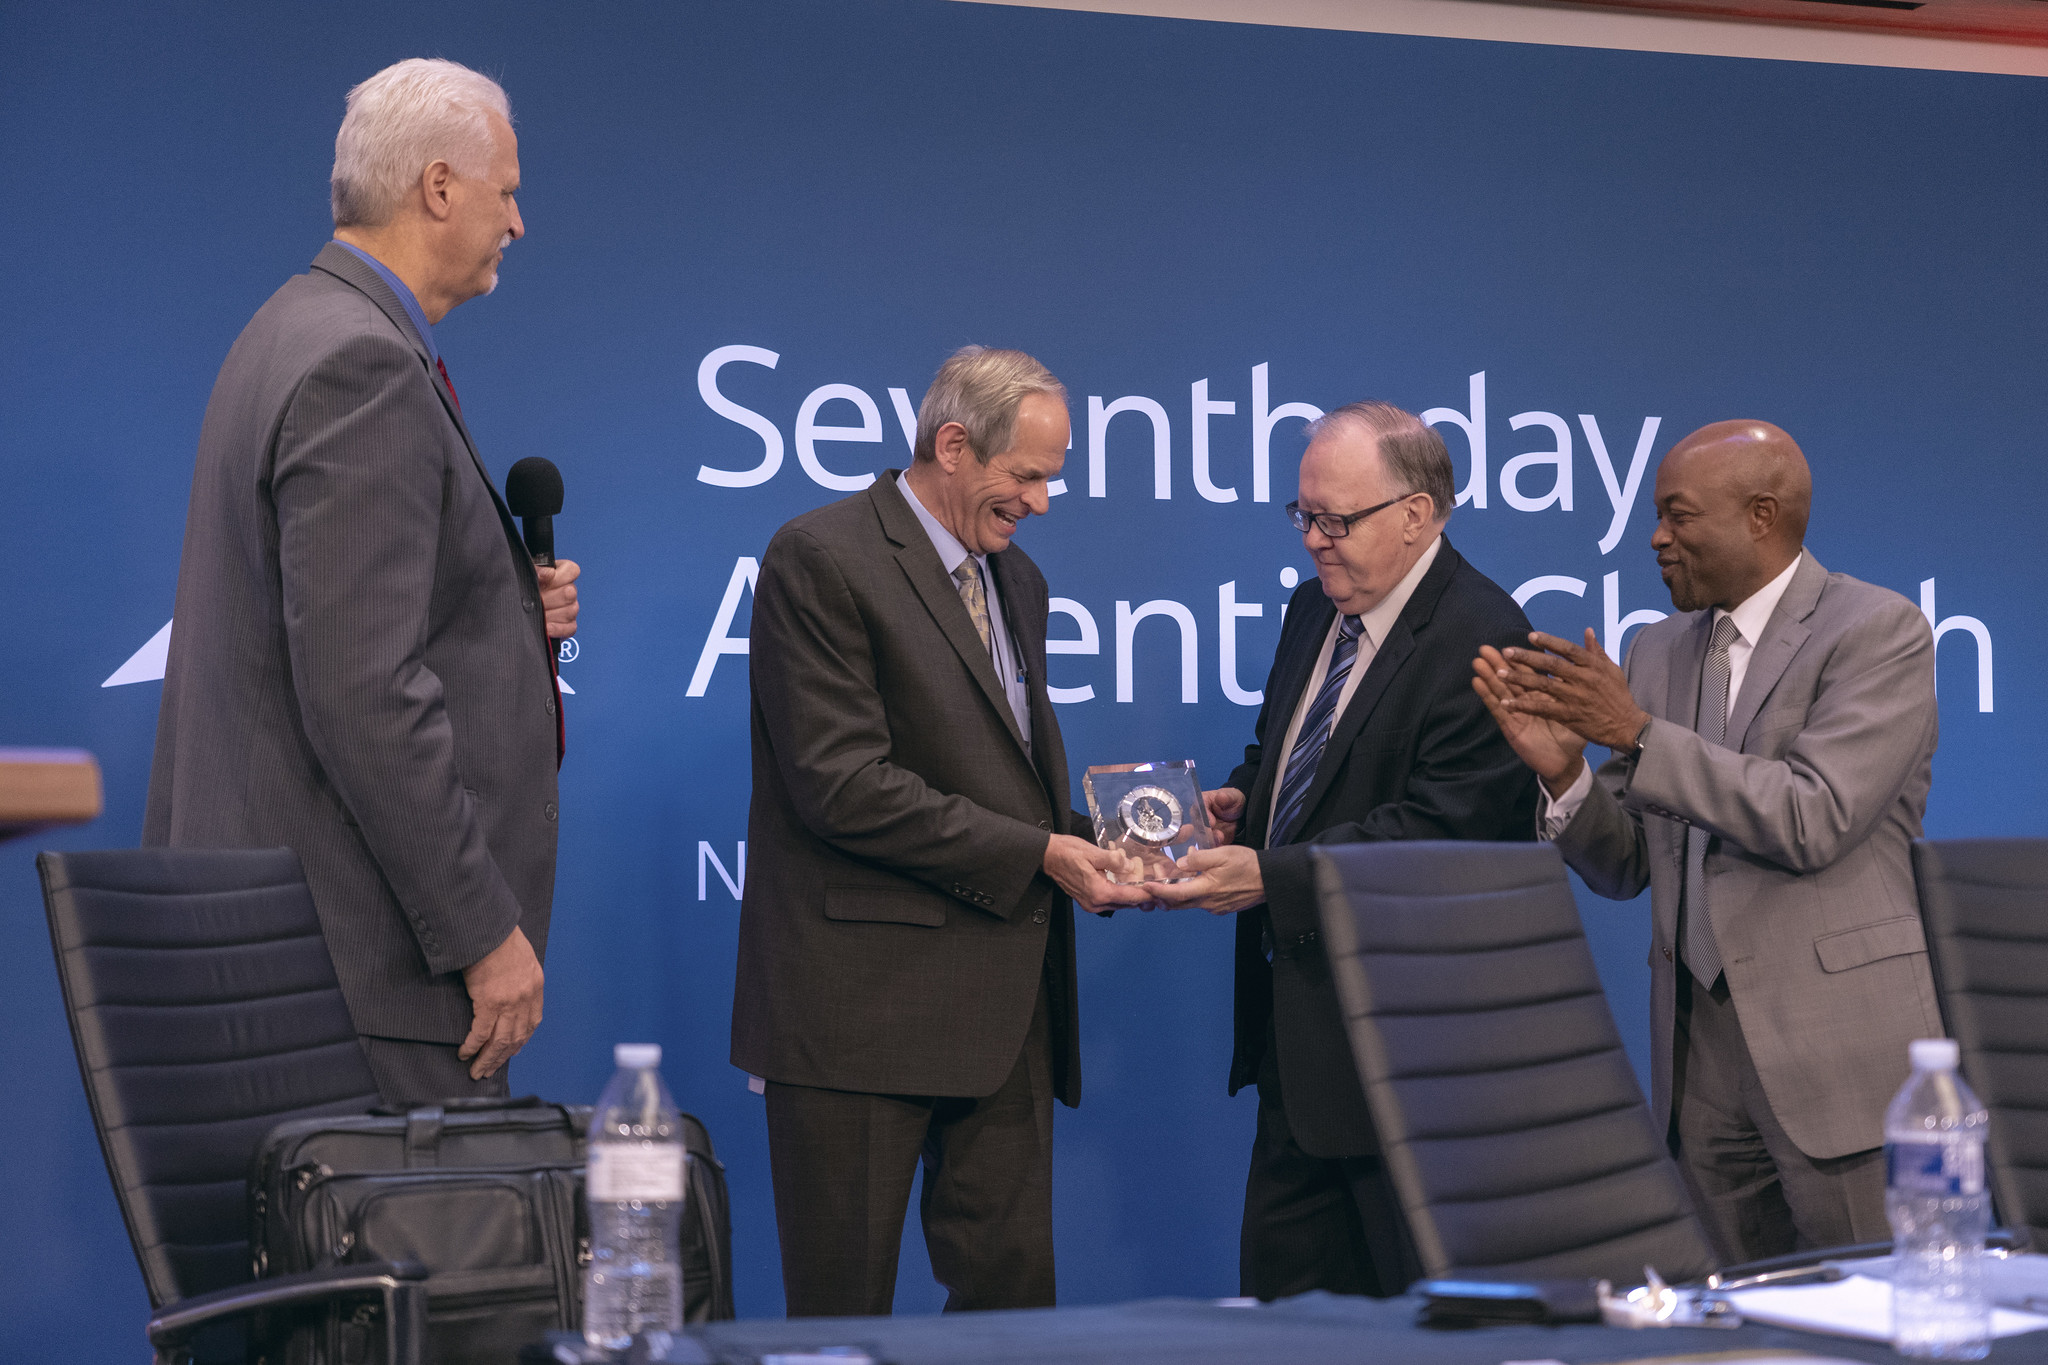 Mike Jamieson, under treasurer, receives a token of appreciation for his many years serving the Adventist Church and the North American Division.